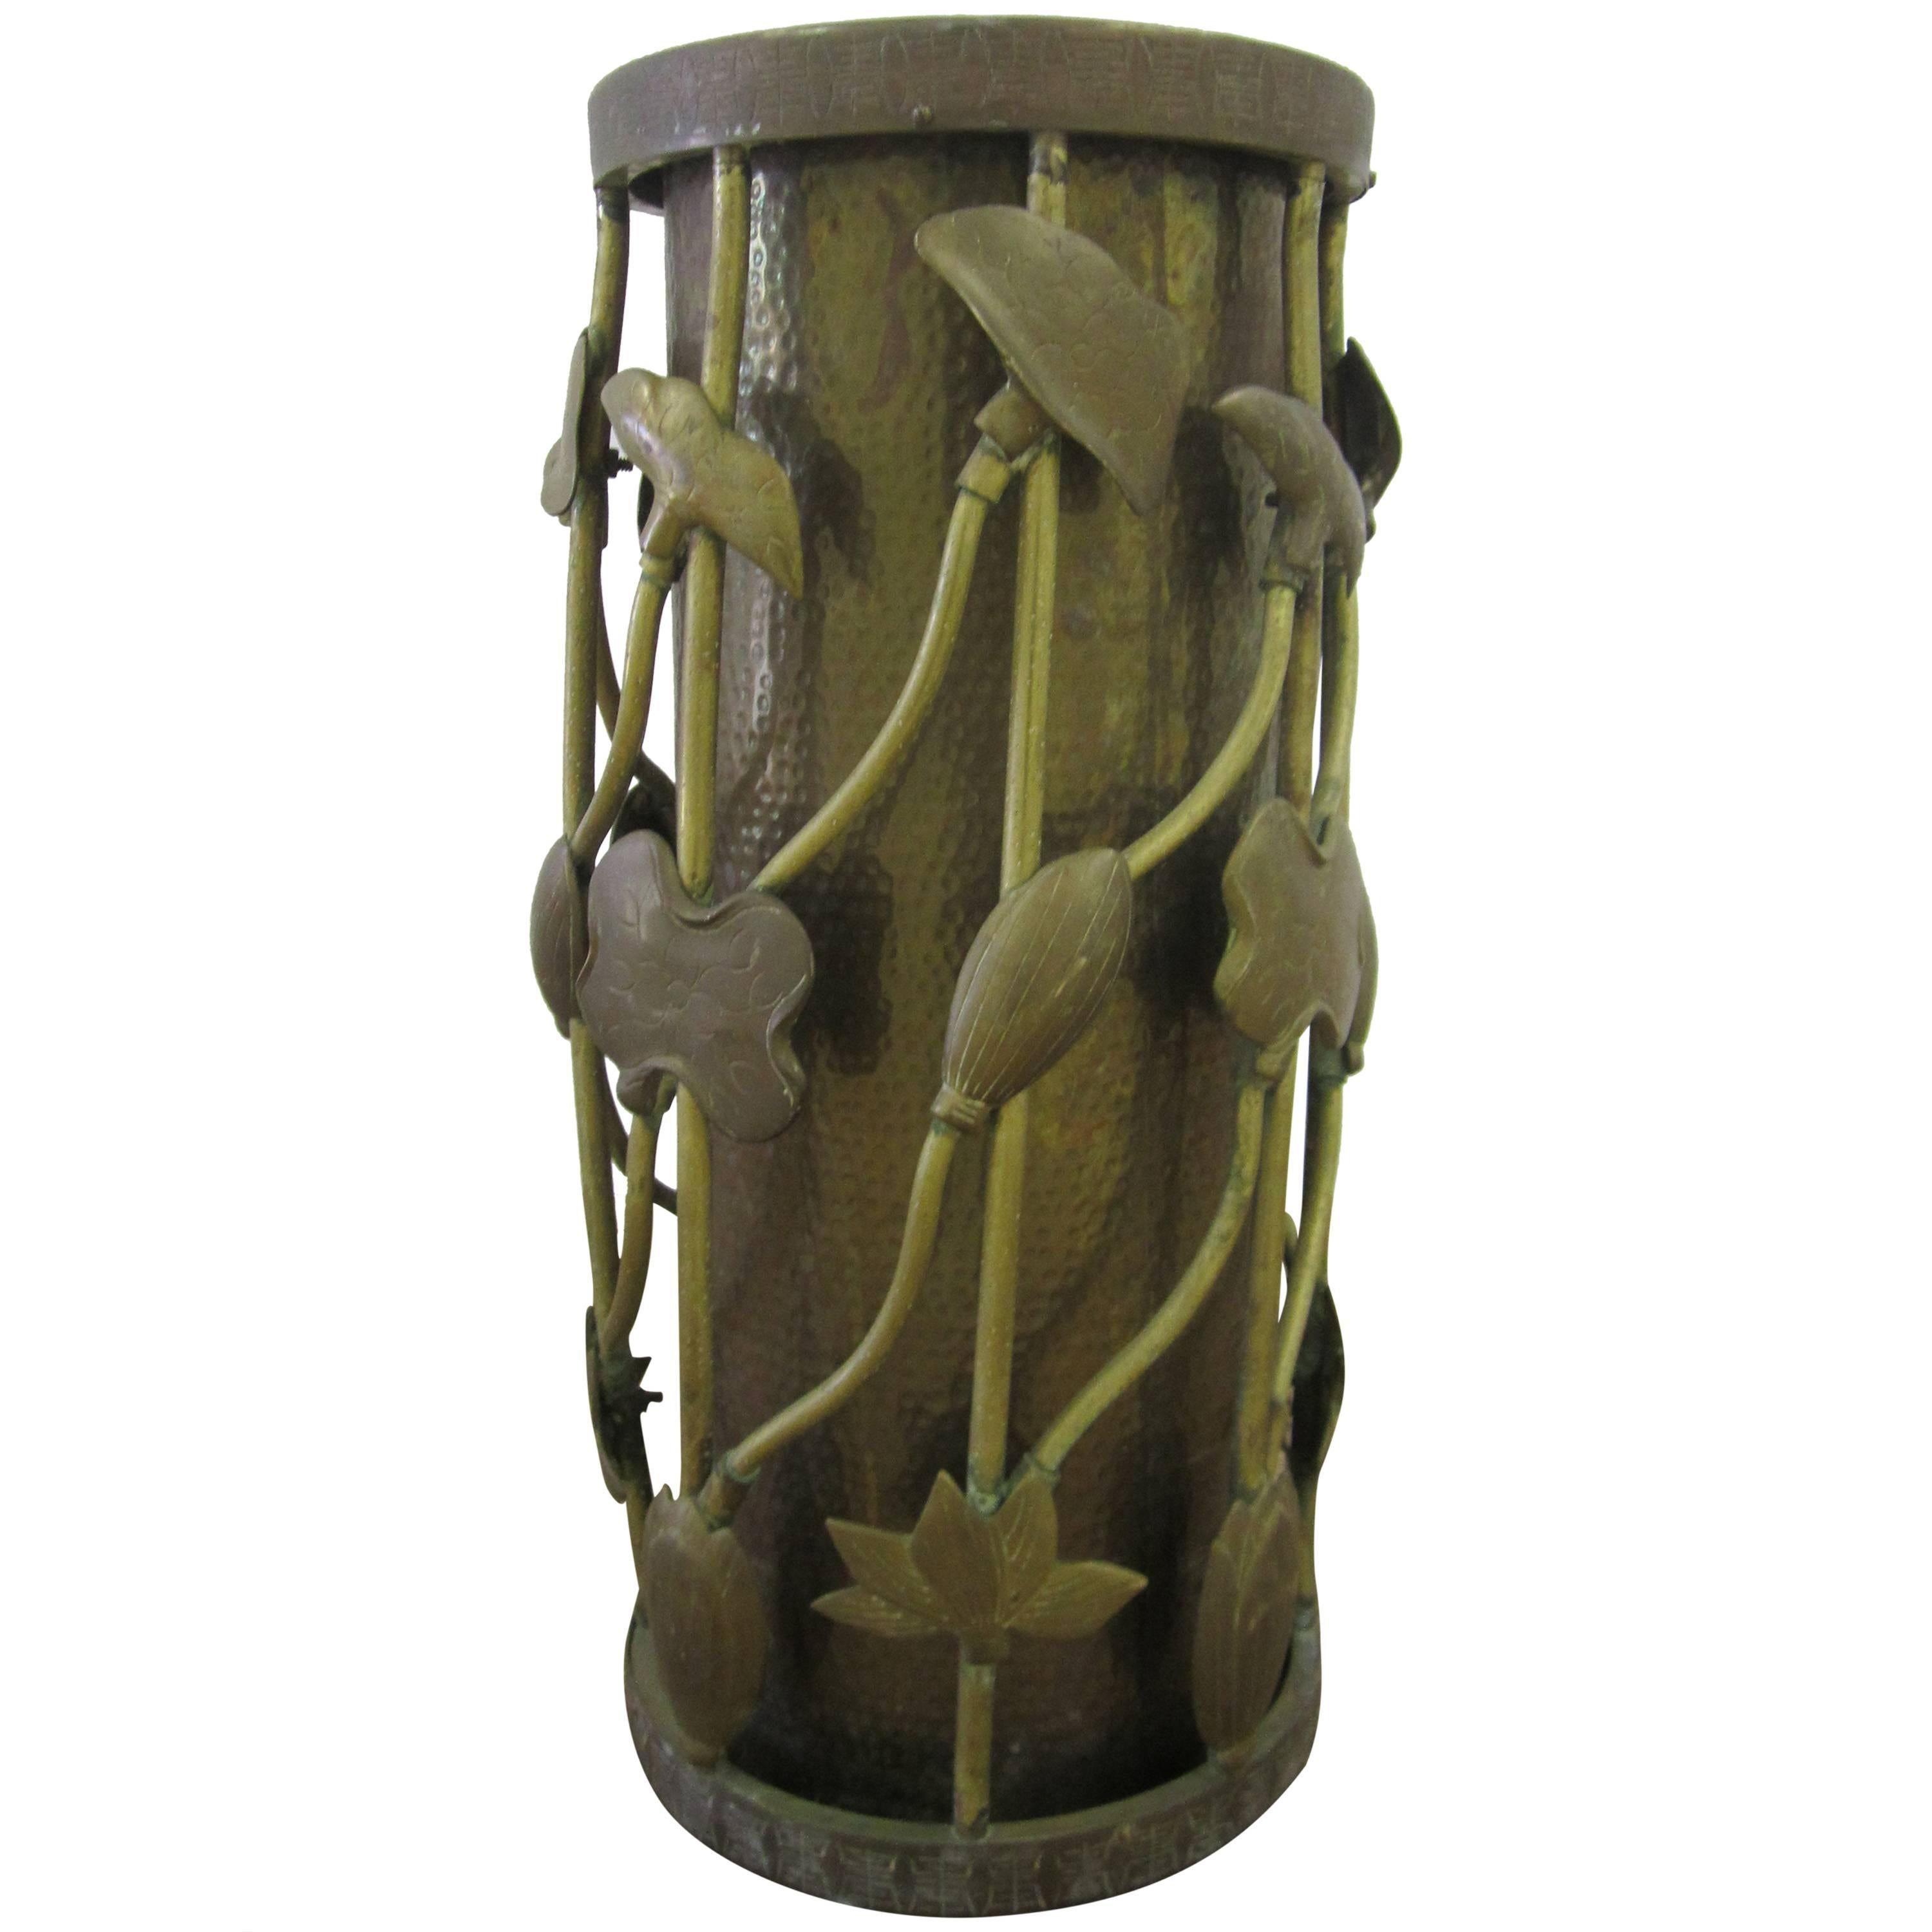 Brass Umbrella Stand in the Art Nouveau or Organic Modern Style